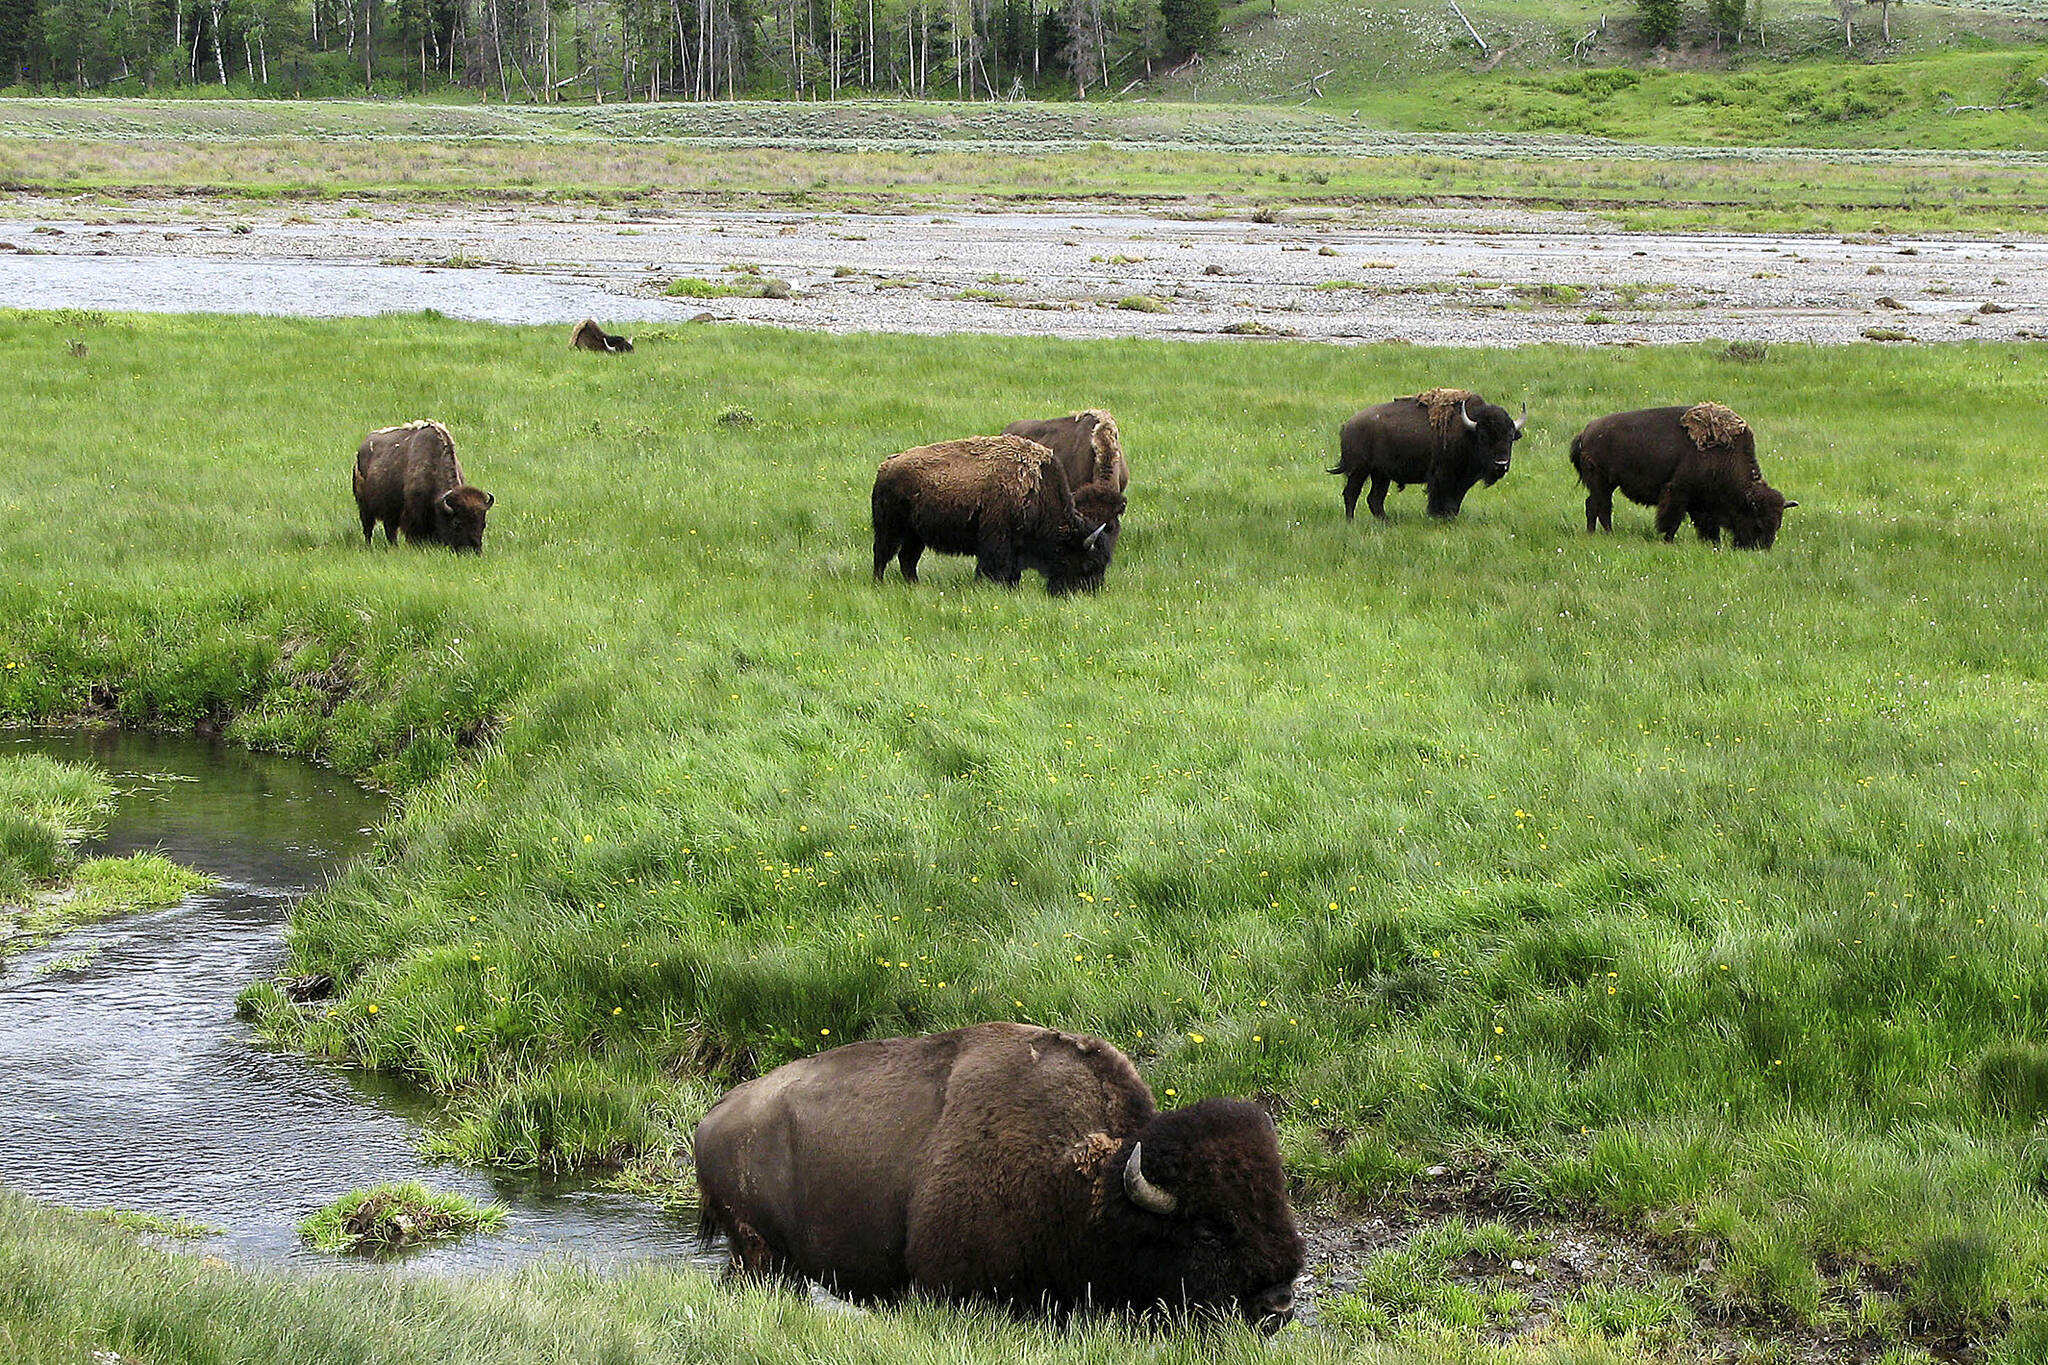 FILE - In this June 19, 2014, file photo, bison graze near a stream in Yellowstone National Park in Wyoming. Researchers have transplanted embryos with roots in the bison herd at Yellowstone National Park into female bison at the Minnesota Zoo in hopes of increasing the genetic diversity of bison herds in the state and refining a tool that could be used across the country someday as part of efforts to restore the animals to the American landscape. (AP Photo/Robert Graves, File)